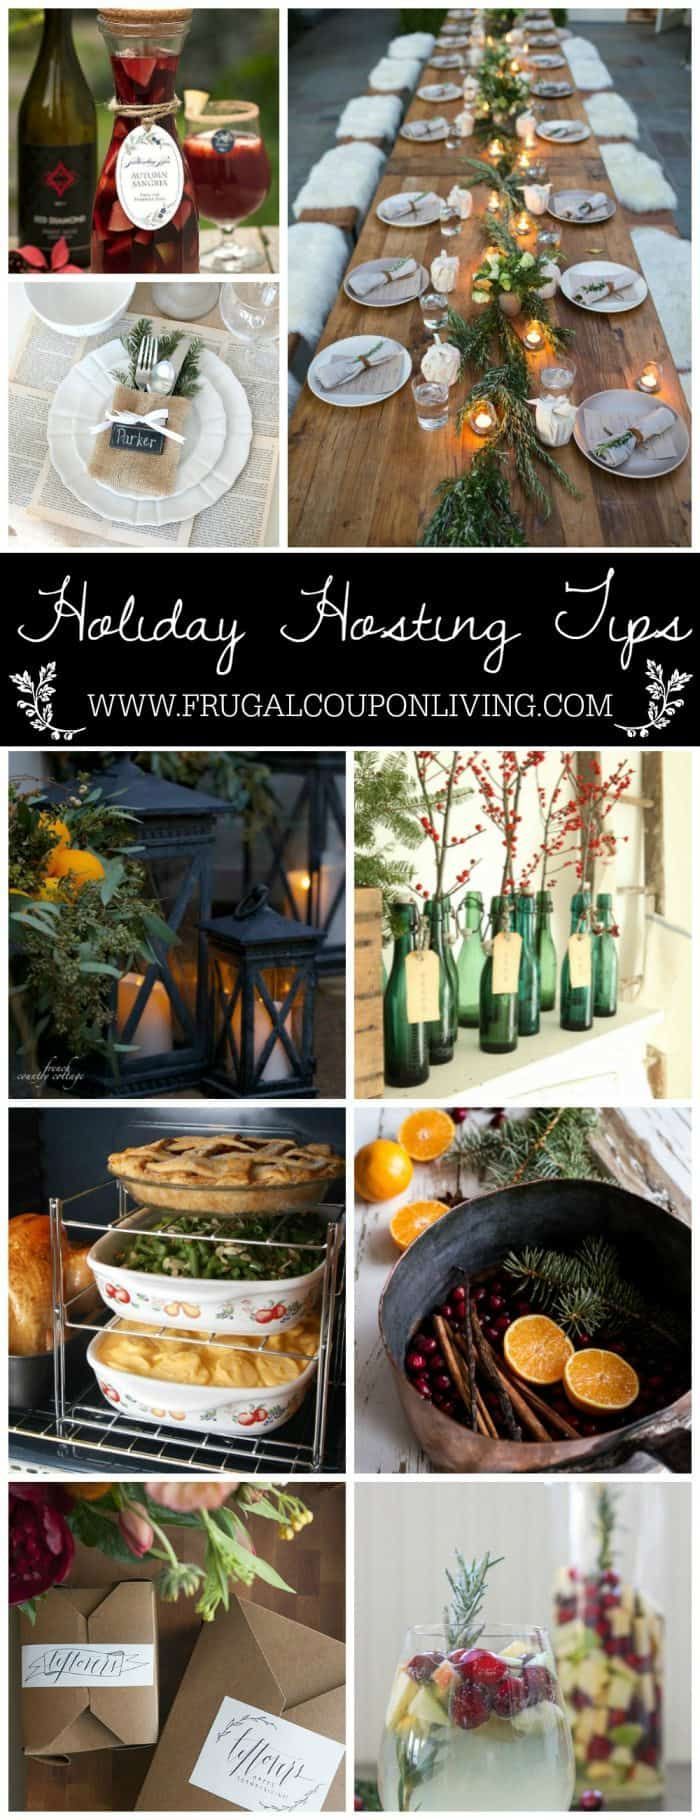 Party and Hosting Tips for the Holidays -   23 hosting holiday Party ideas